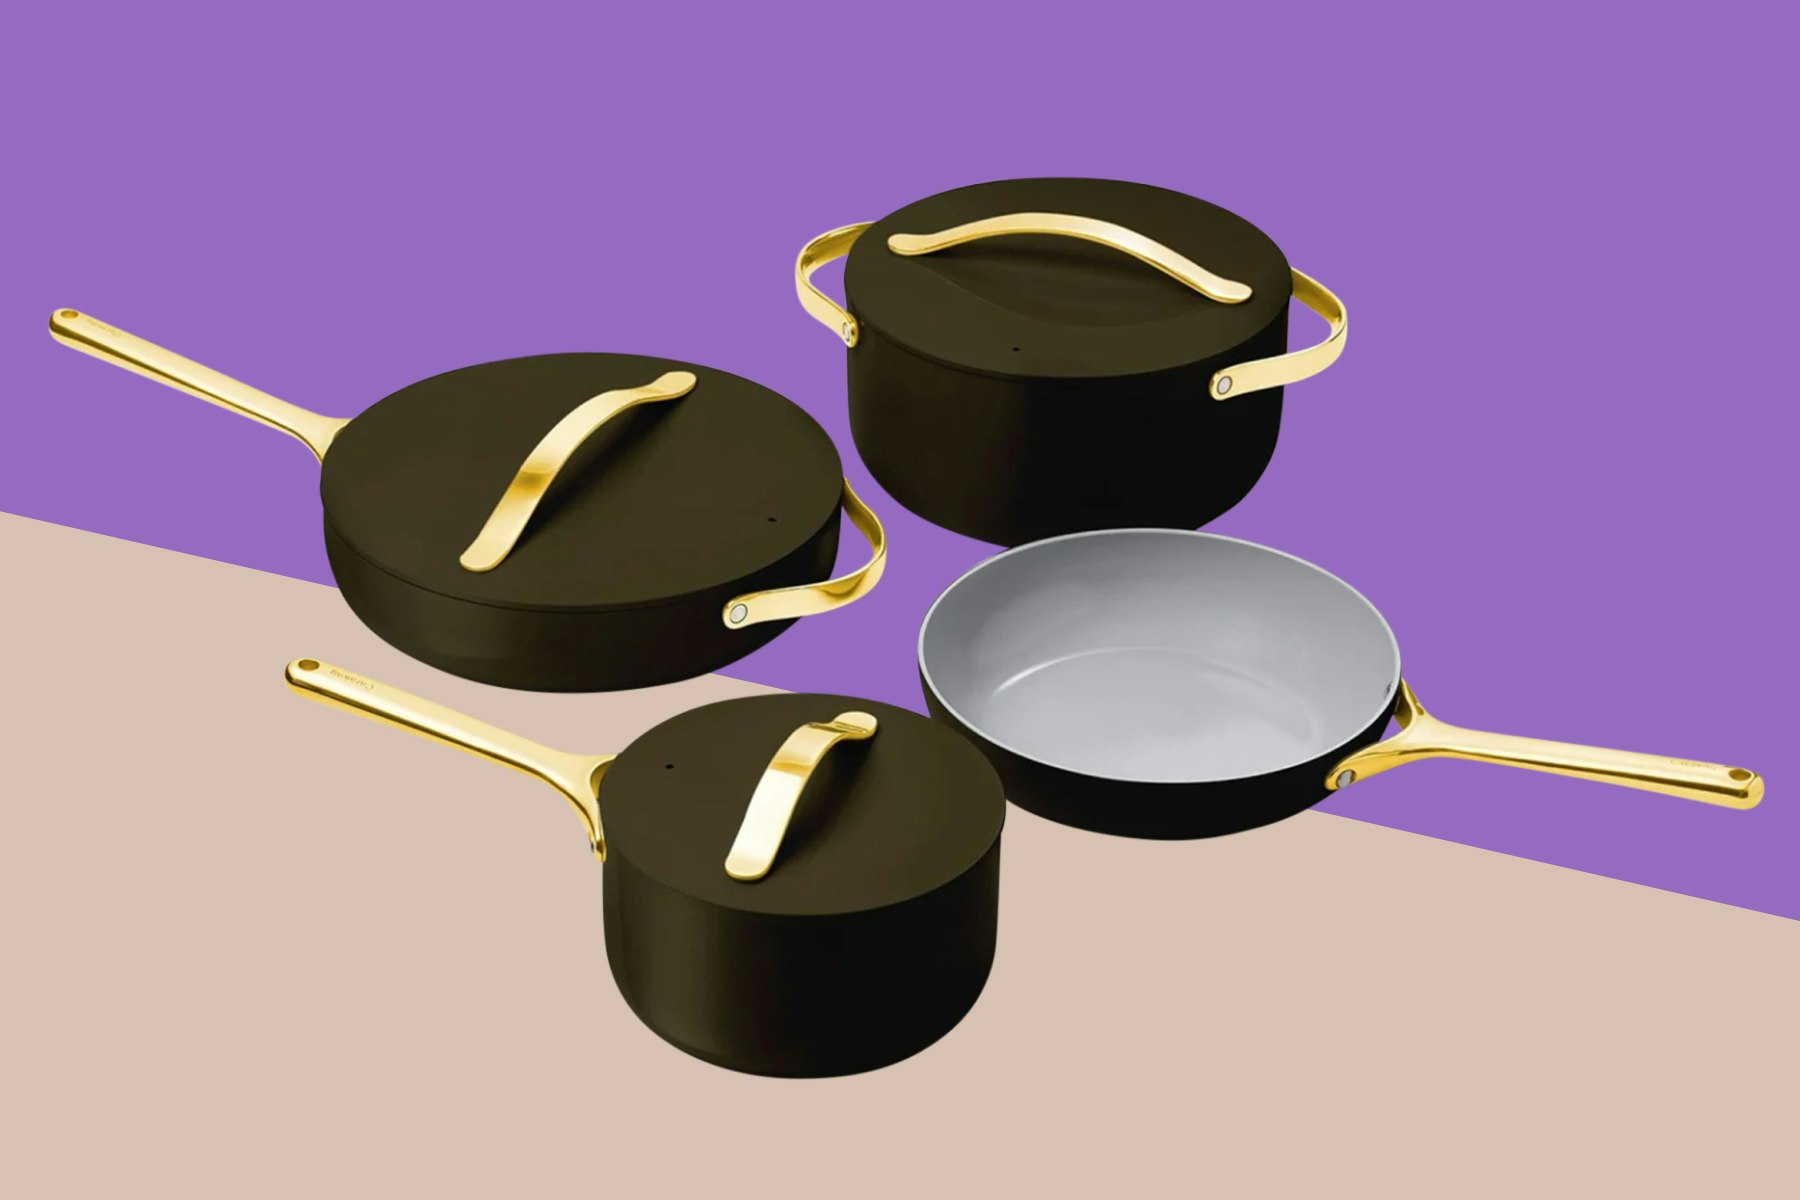 Caraway Non-Toxic and Non-Stick Cookware Set in Black with Gold